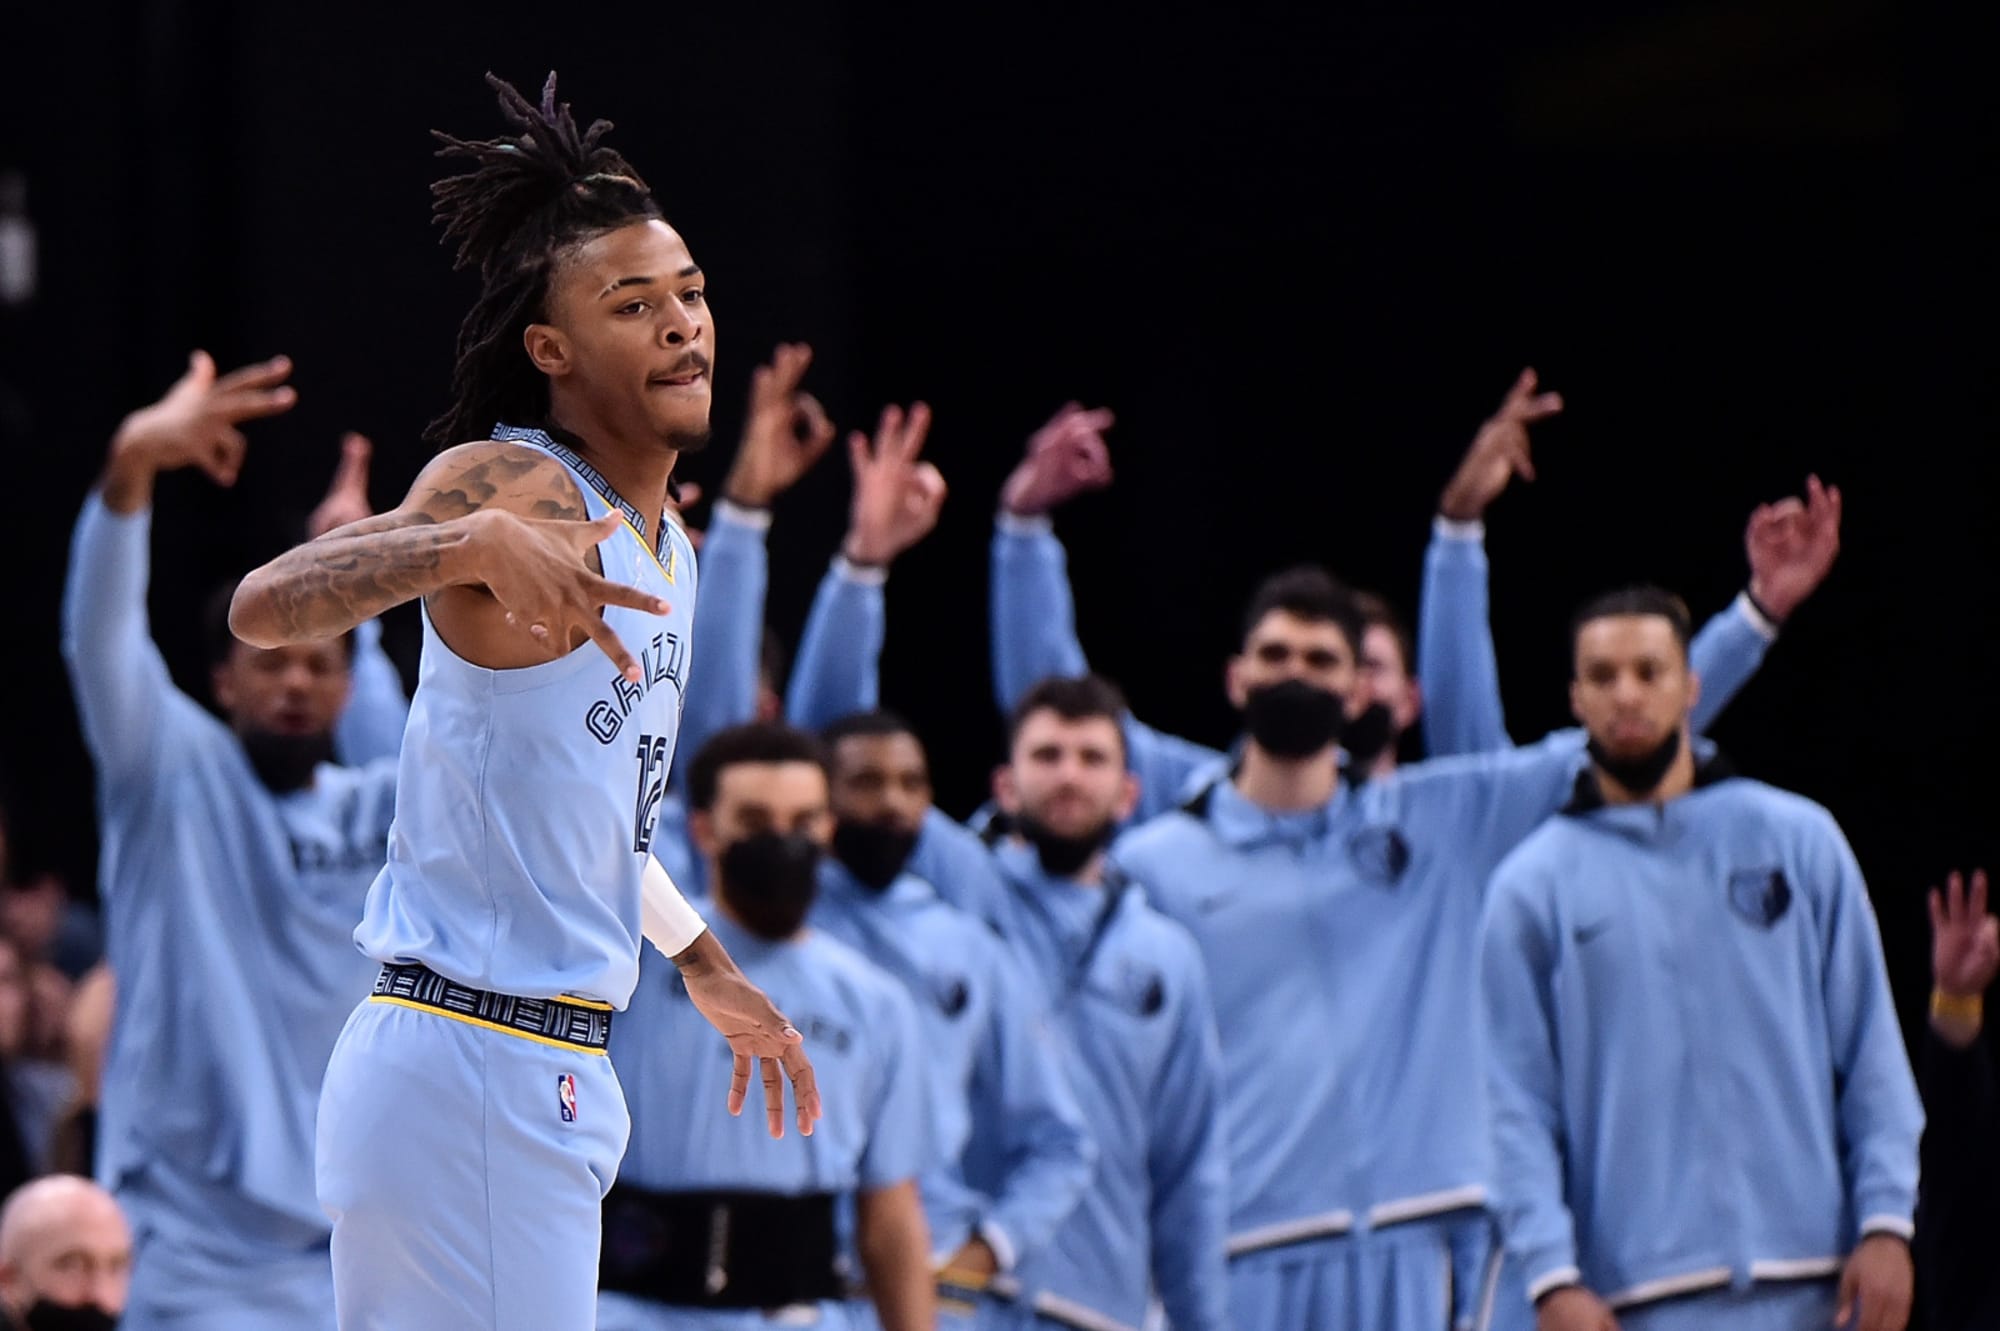 Ja Morant and Memphis Grizzlies Offer Jersey Swap for Young Fans